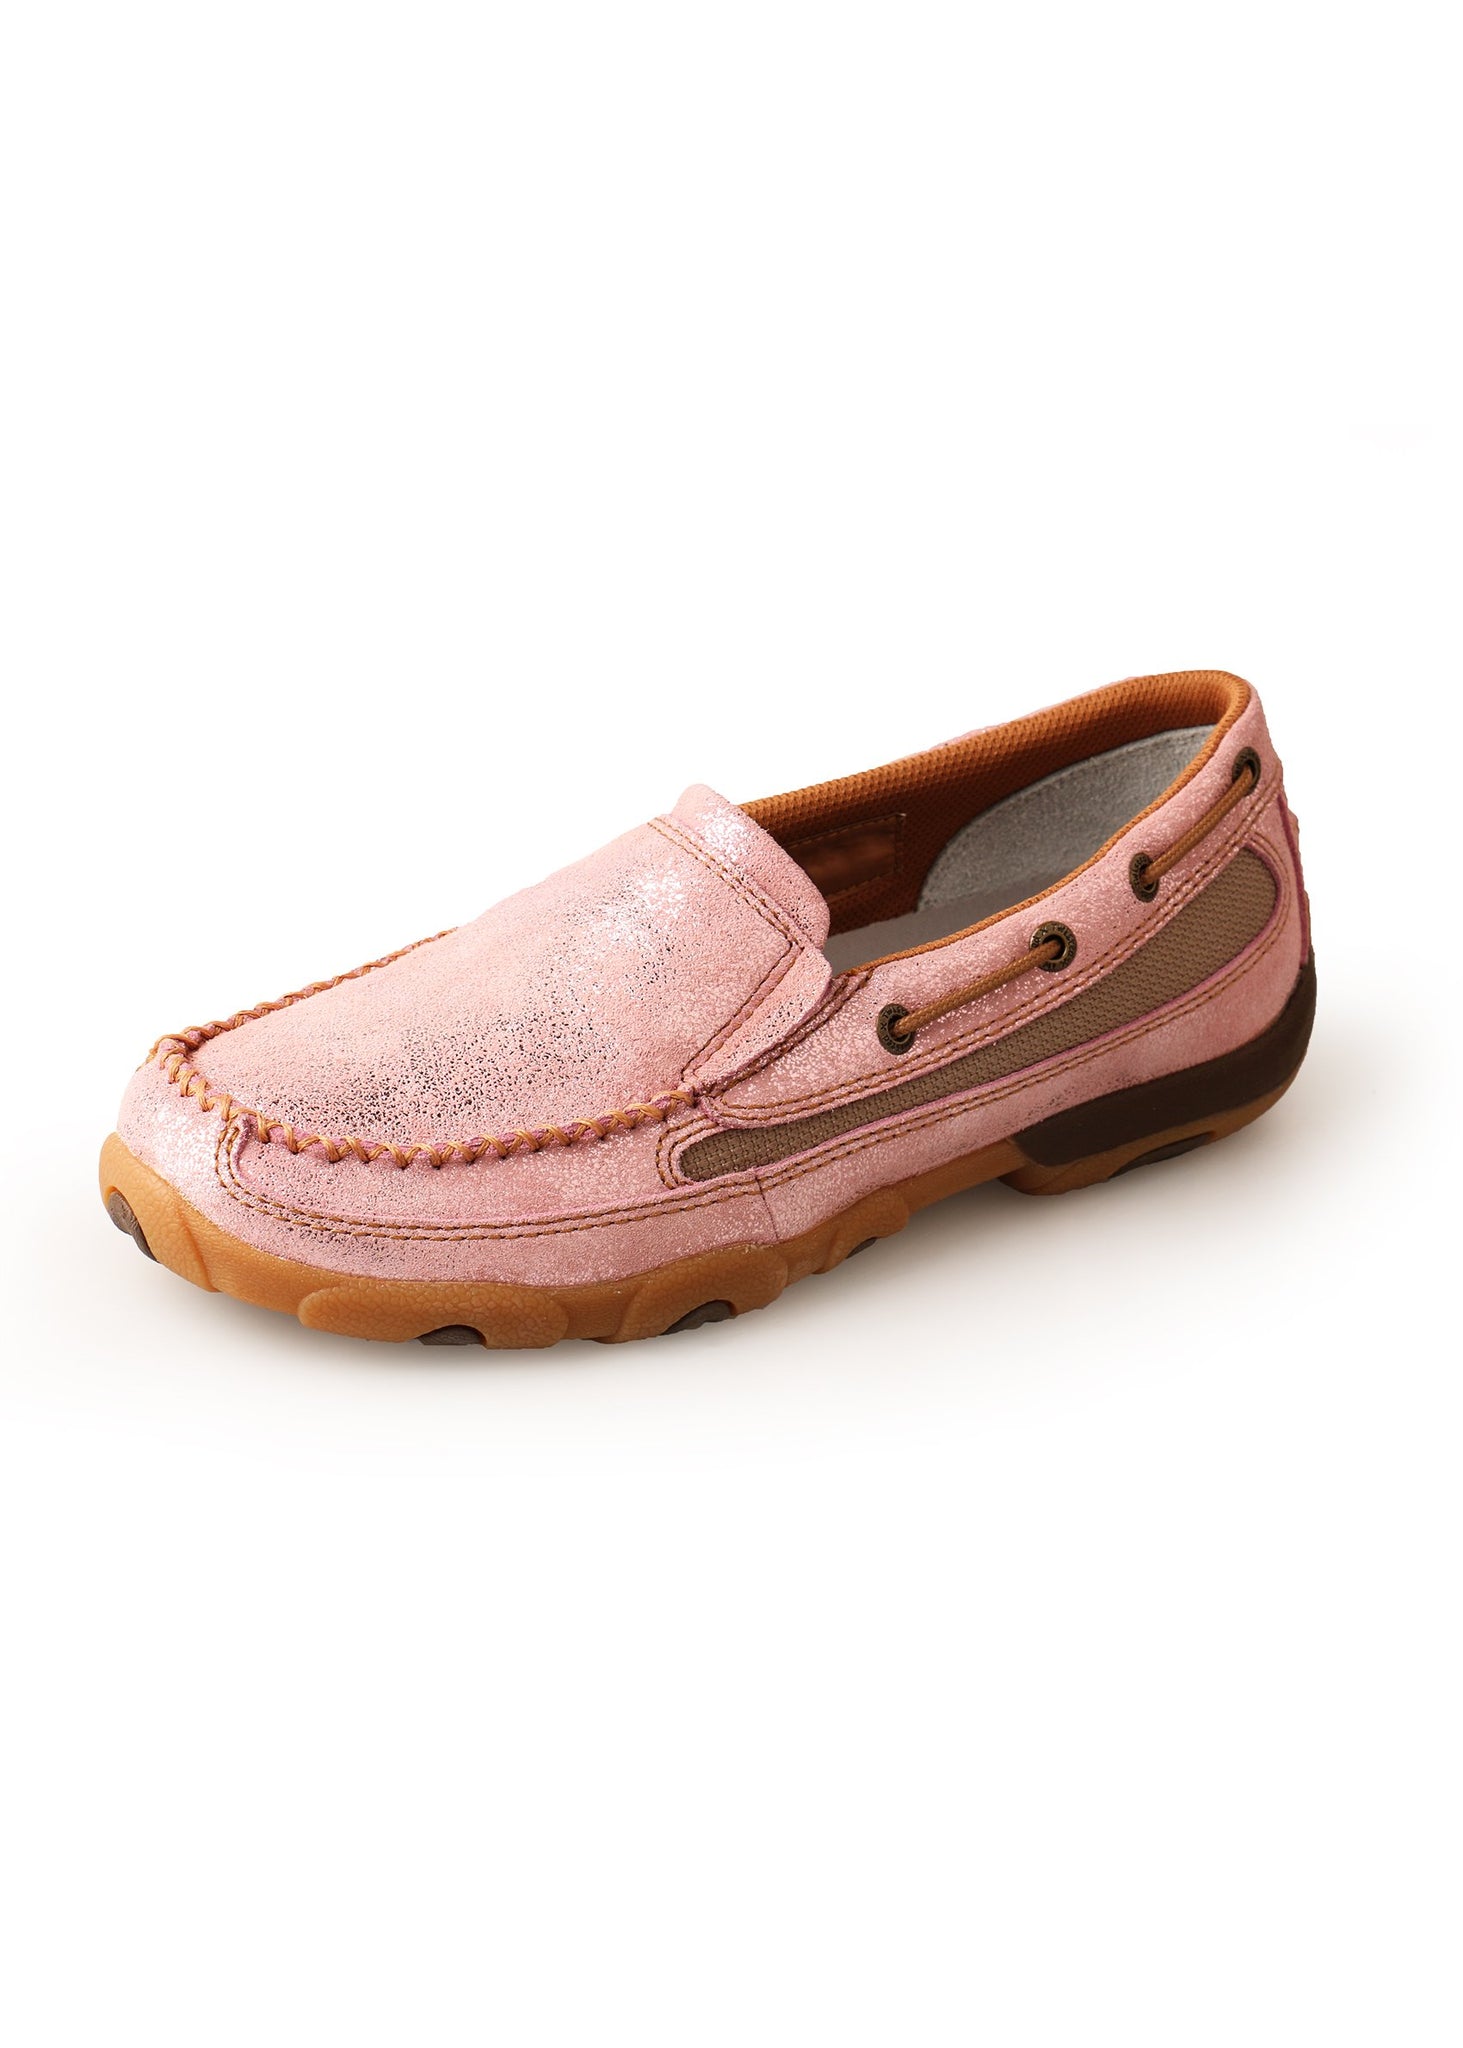 Womens Slip On Mocs - Pink Lustre - Womens shoes